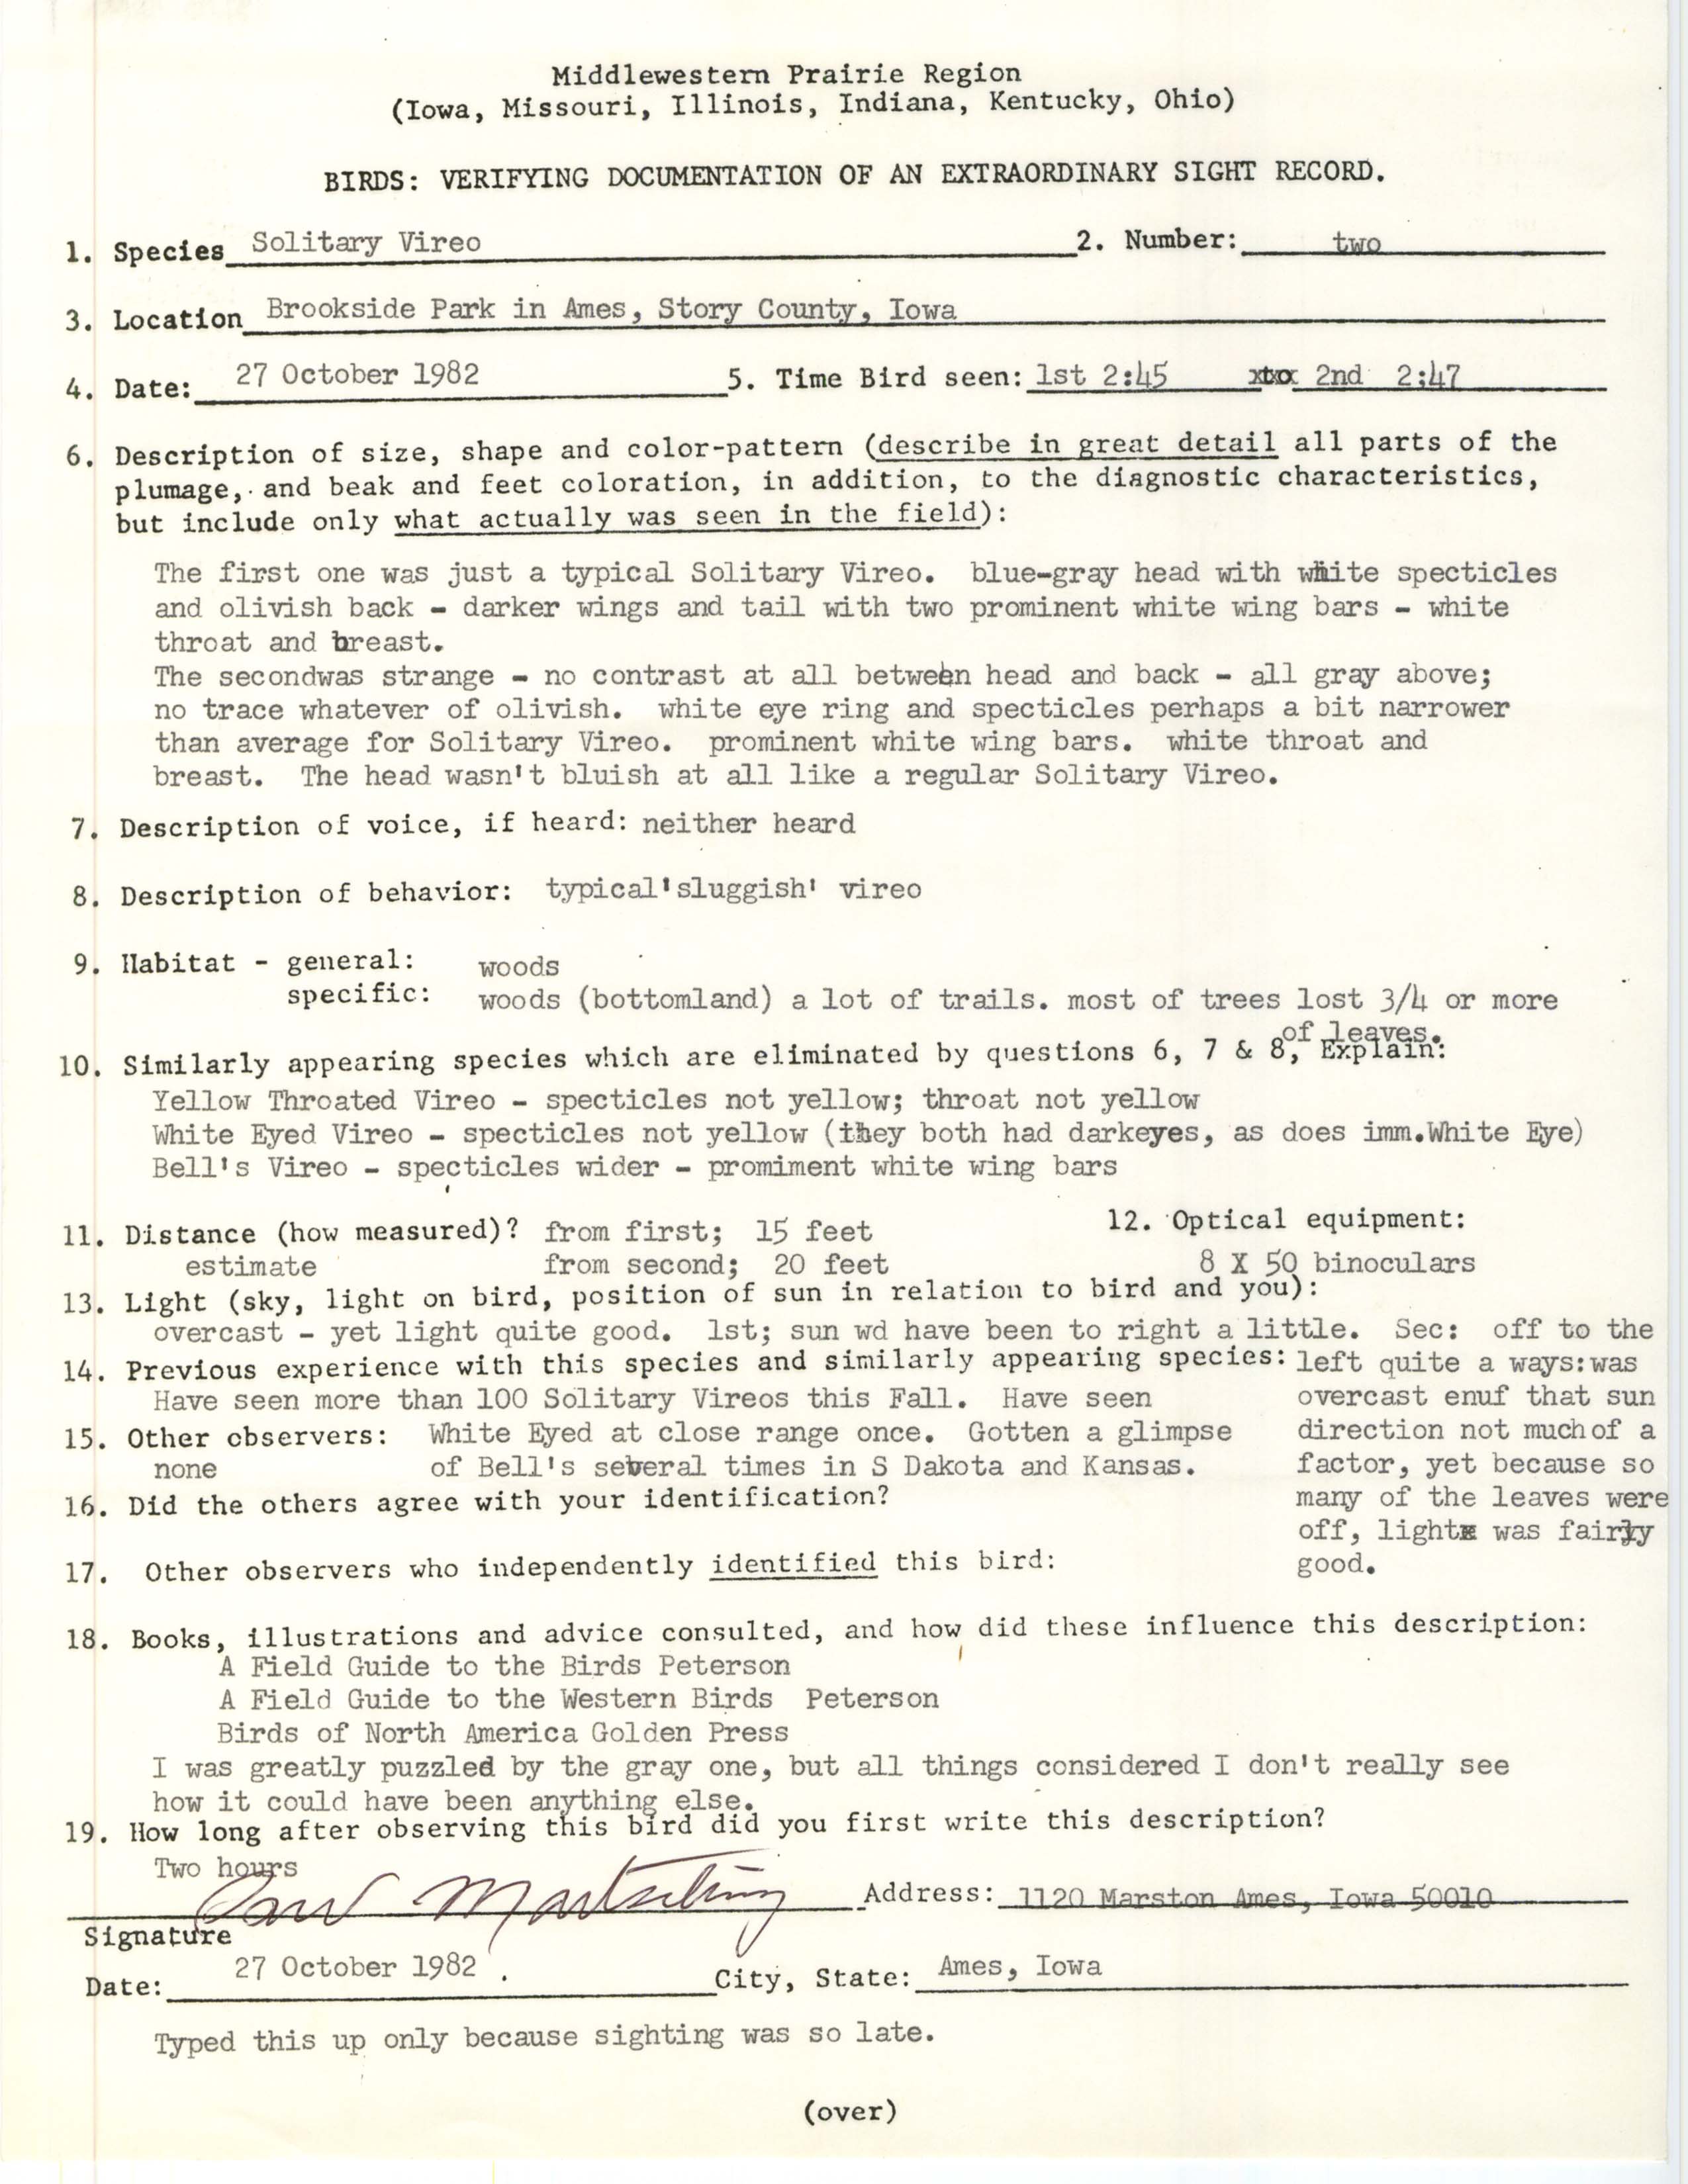 Rare bird documentation form for Solitary Vireo at Brookside Park in Ames, 1982